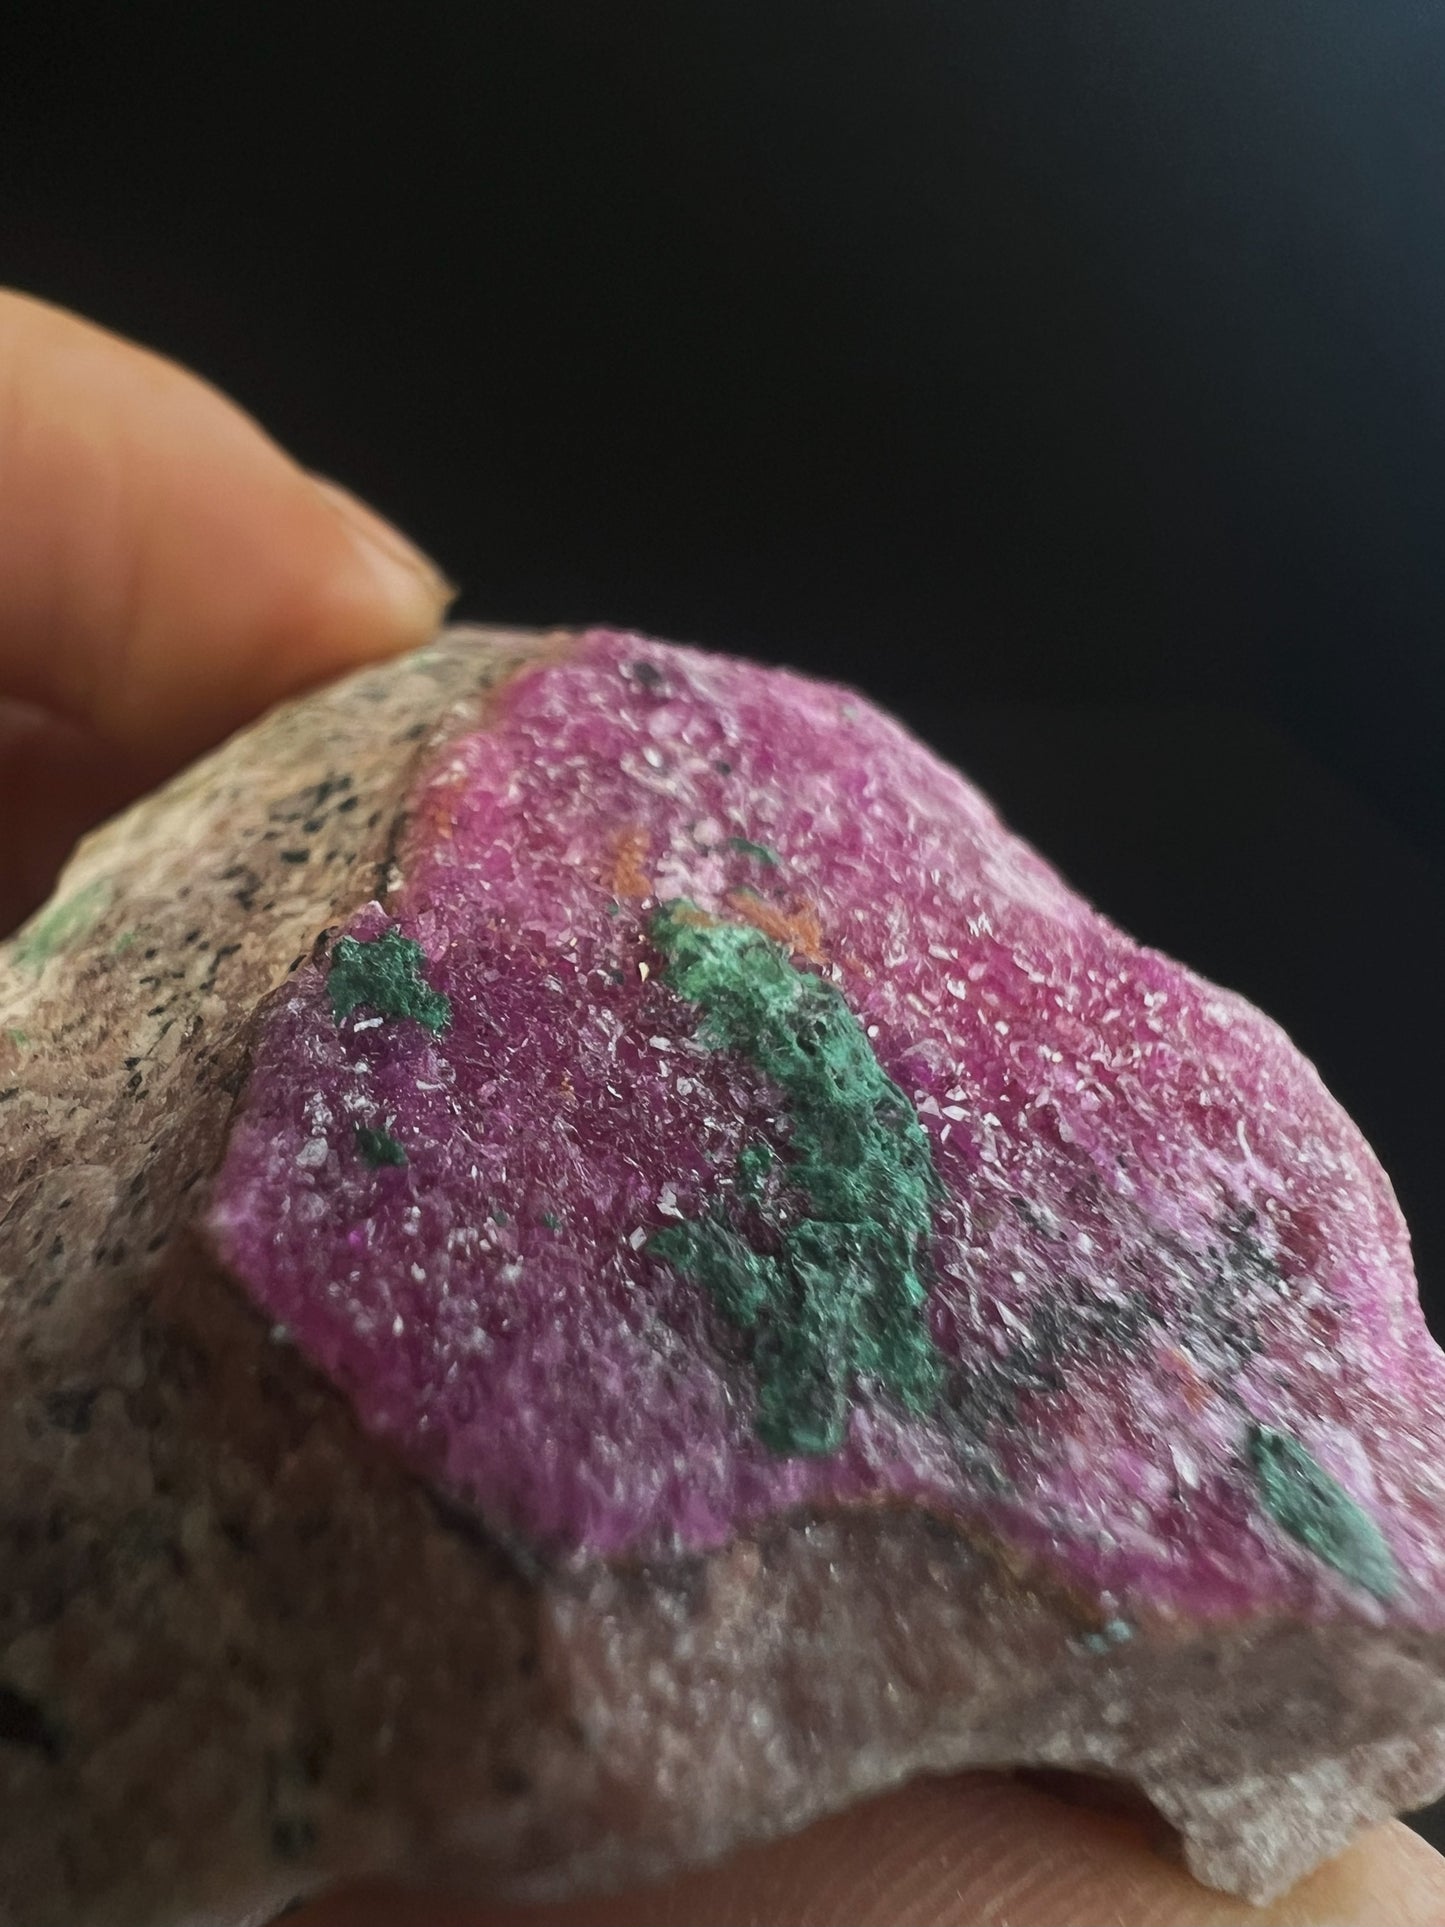 Gorgeous Pink Cobalt Calcite With Malachite On Matrix From Morocco- Gift, Crystal Healing